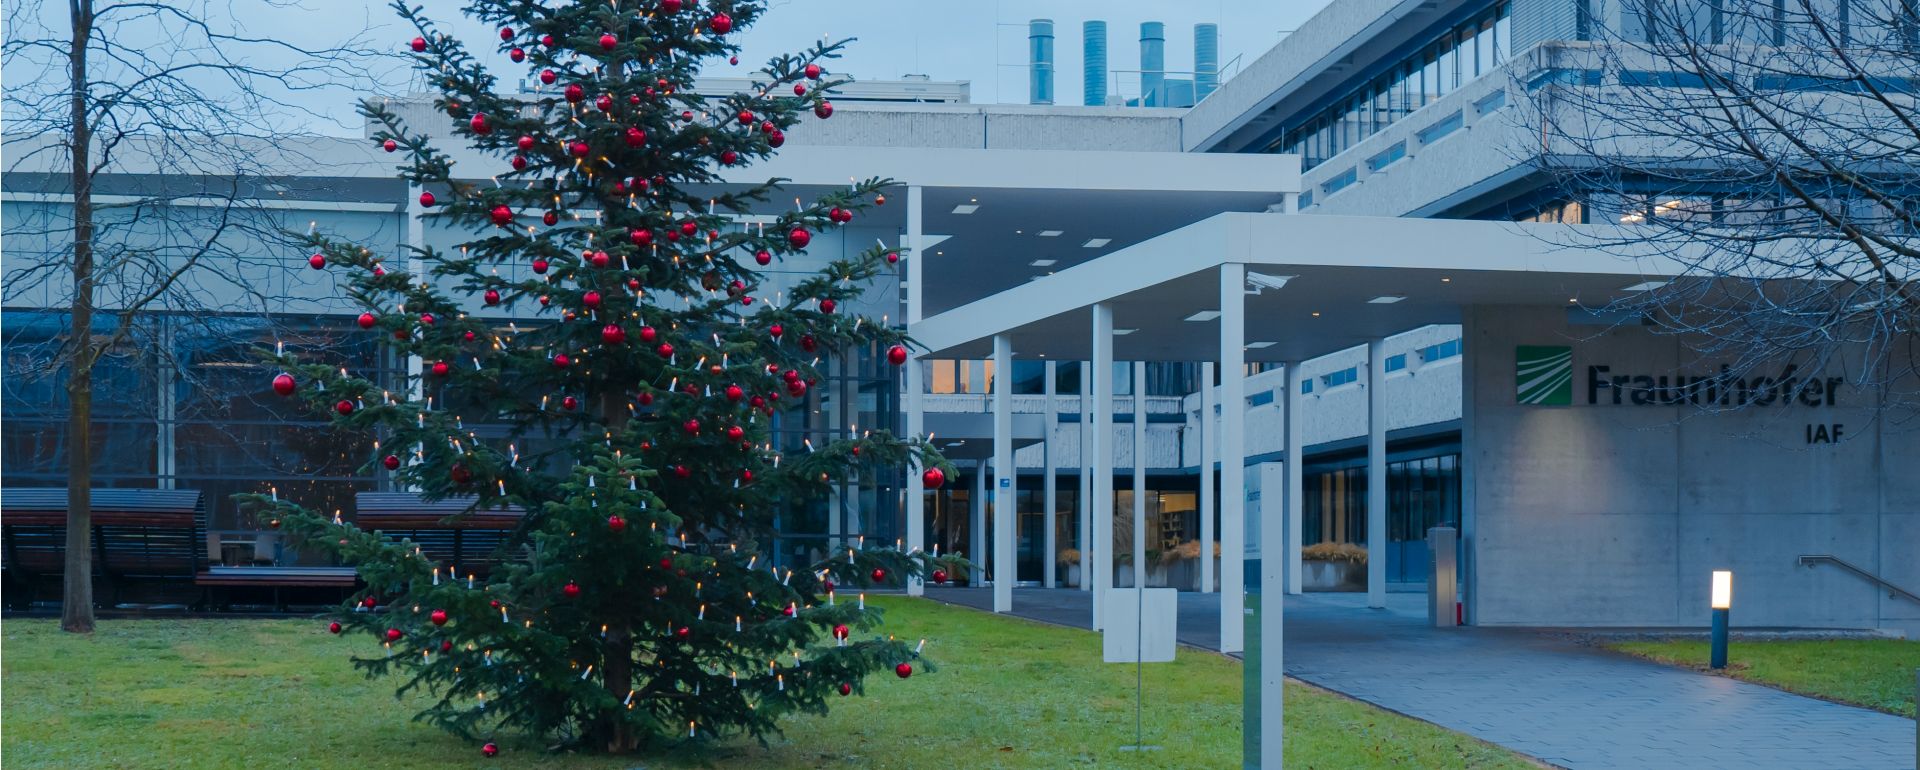 Christmas tree of the Fraunhofer IAF in 2023